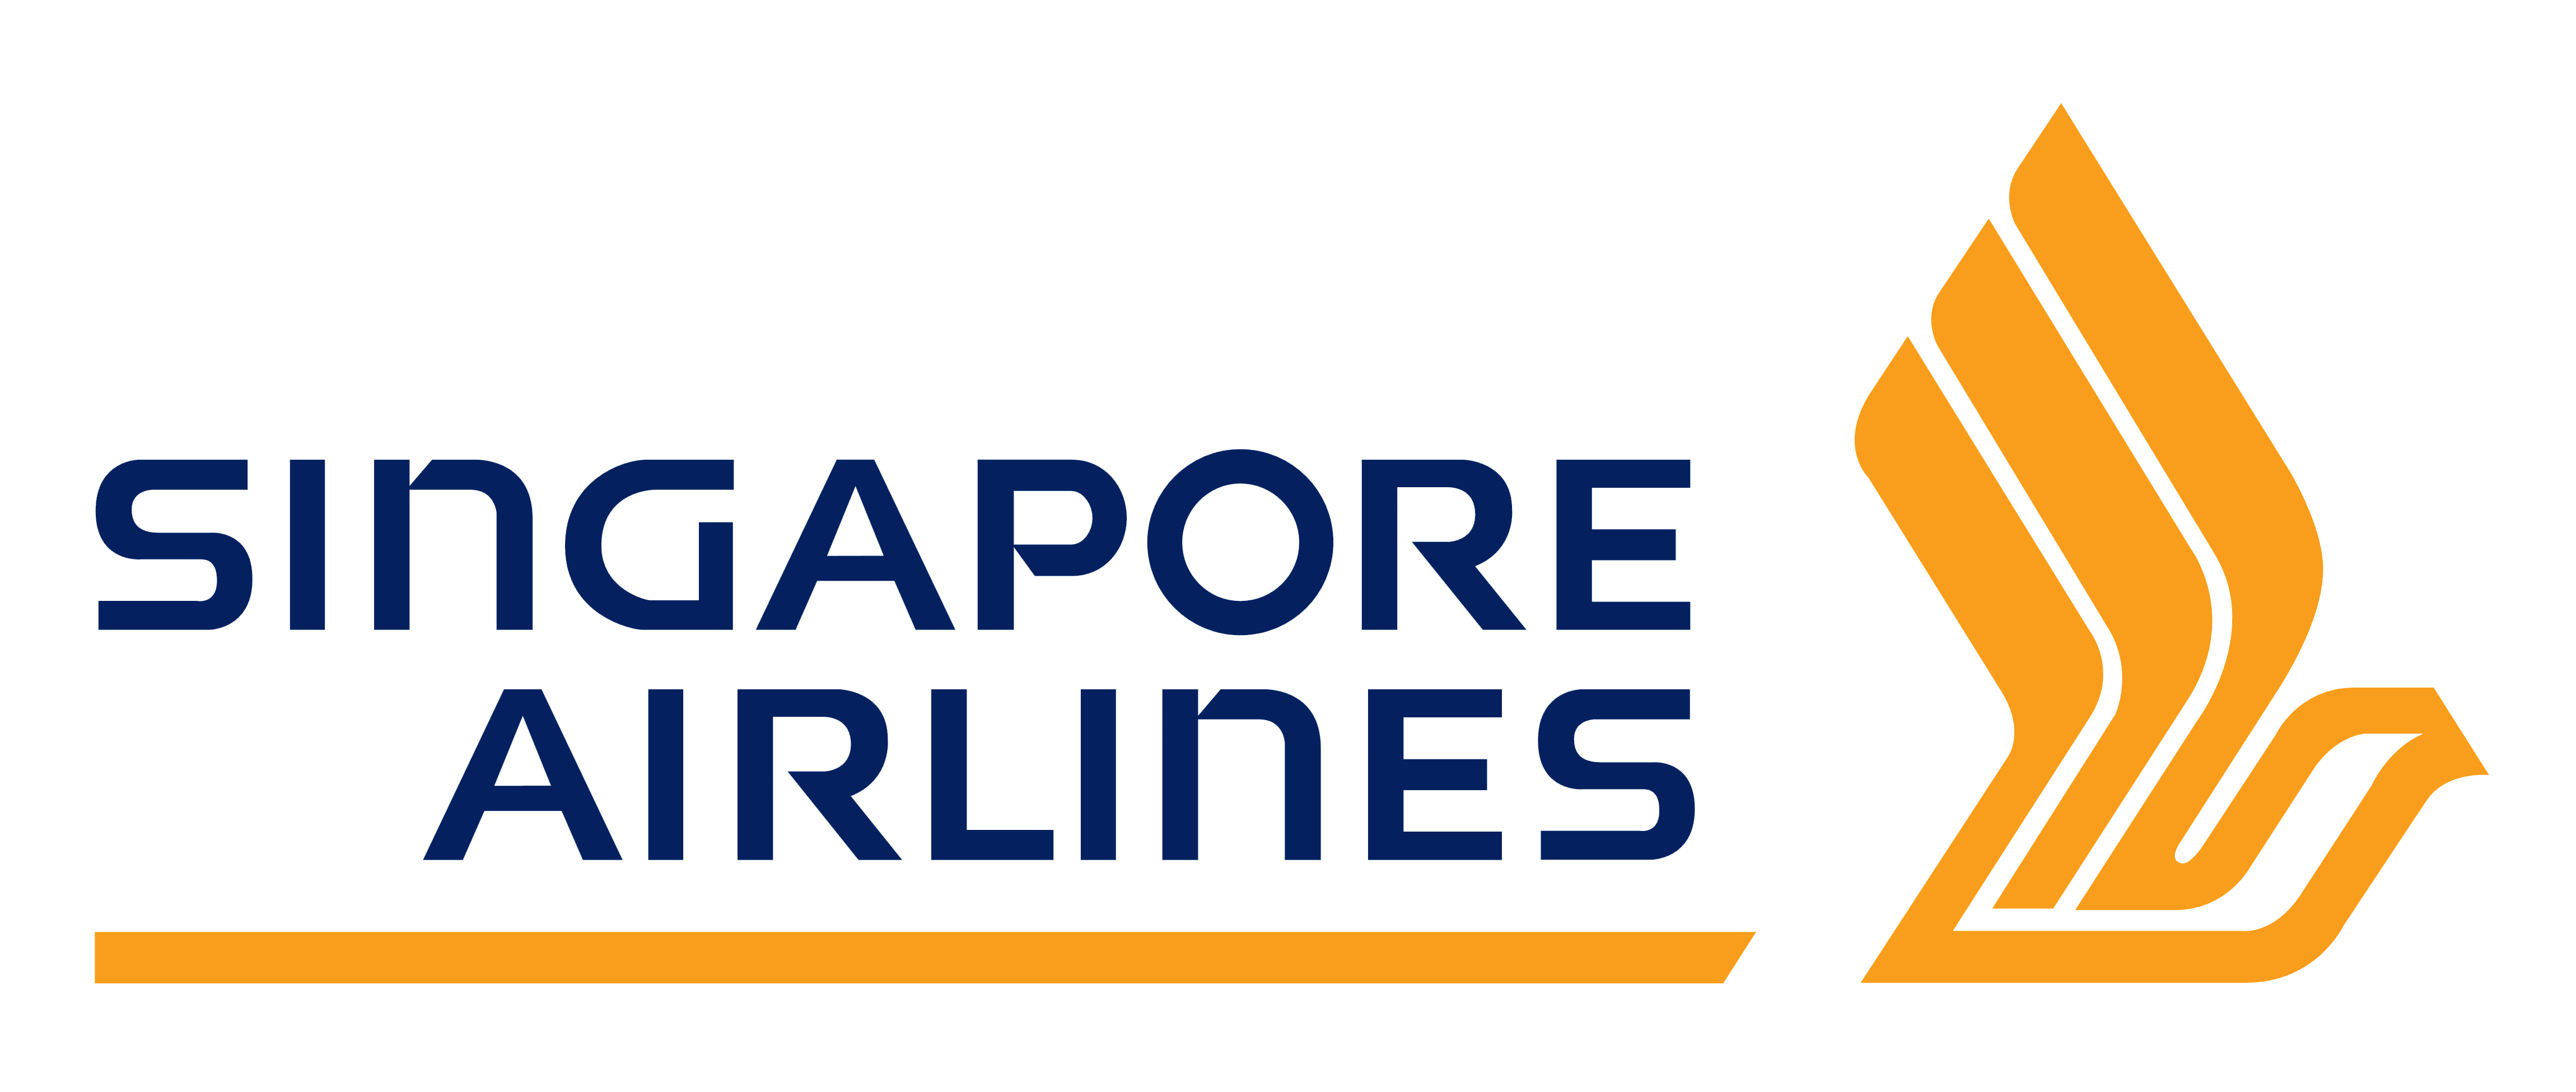 Singapore Airlines Logo Png Hdpng.com 4600 - Singapore Airlines, Transparent background PNG HD thumbnail